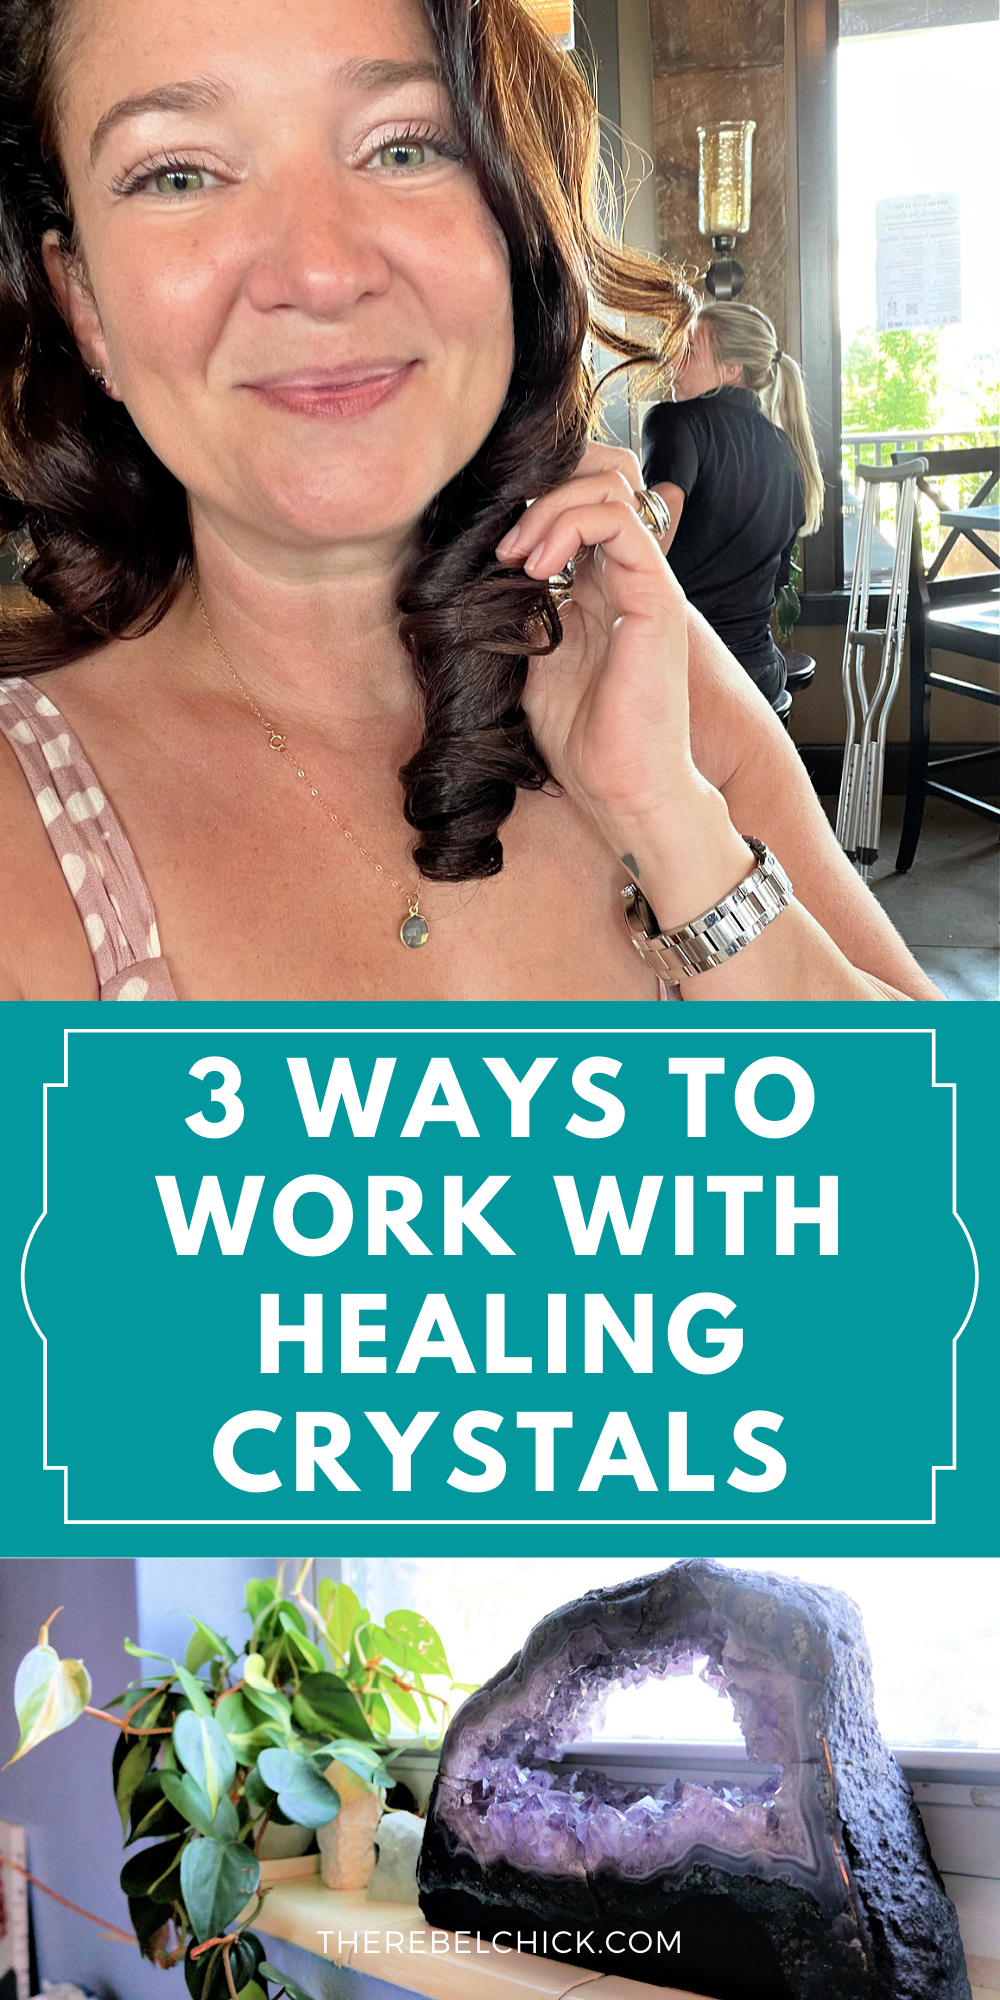 3 Ways to Work With Healing Crystals